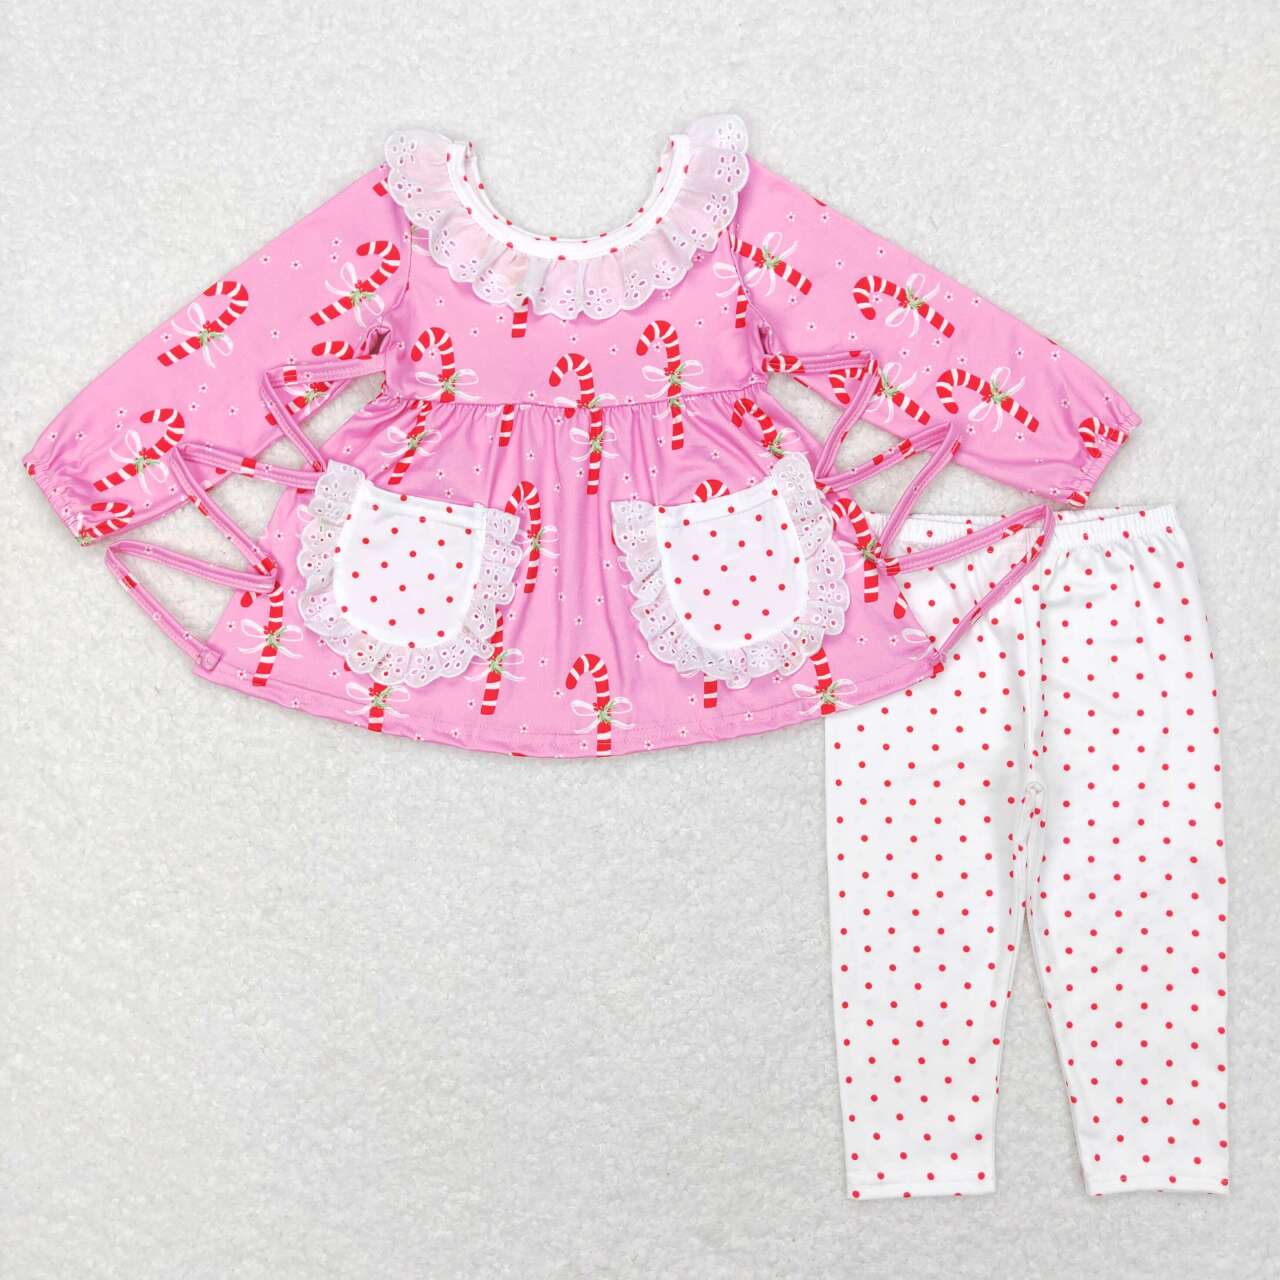 GLP0883 Candy Cane Print Girls Christmas Clothes Set